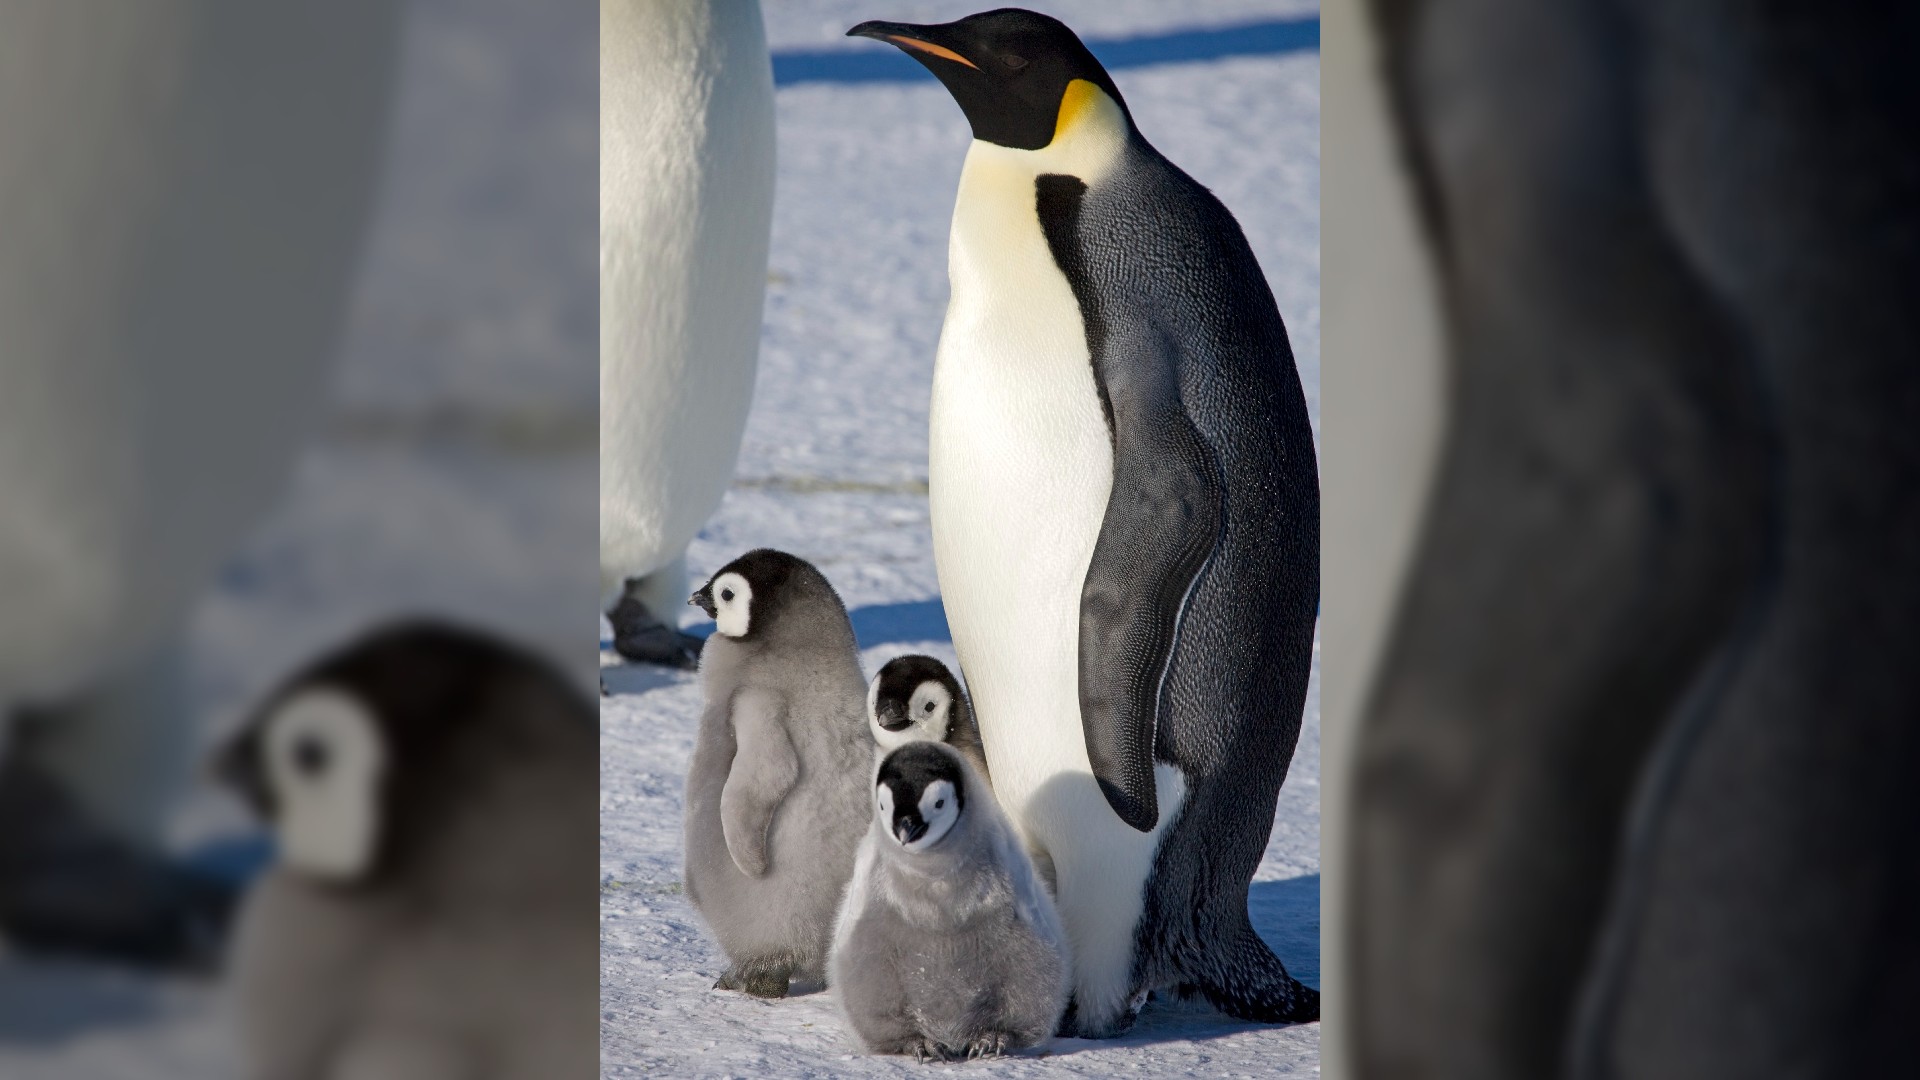 Emperor penguins are the largest of all penguins and stand up to 39 inches (100 cm) tall. They get their name from their dramatic black, white and yellow plumage.